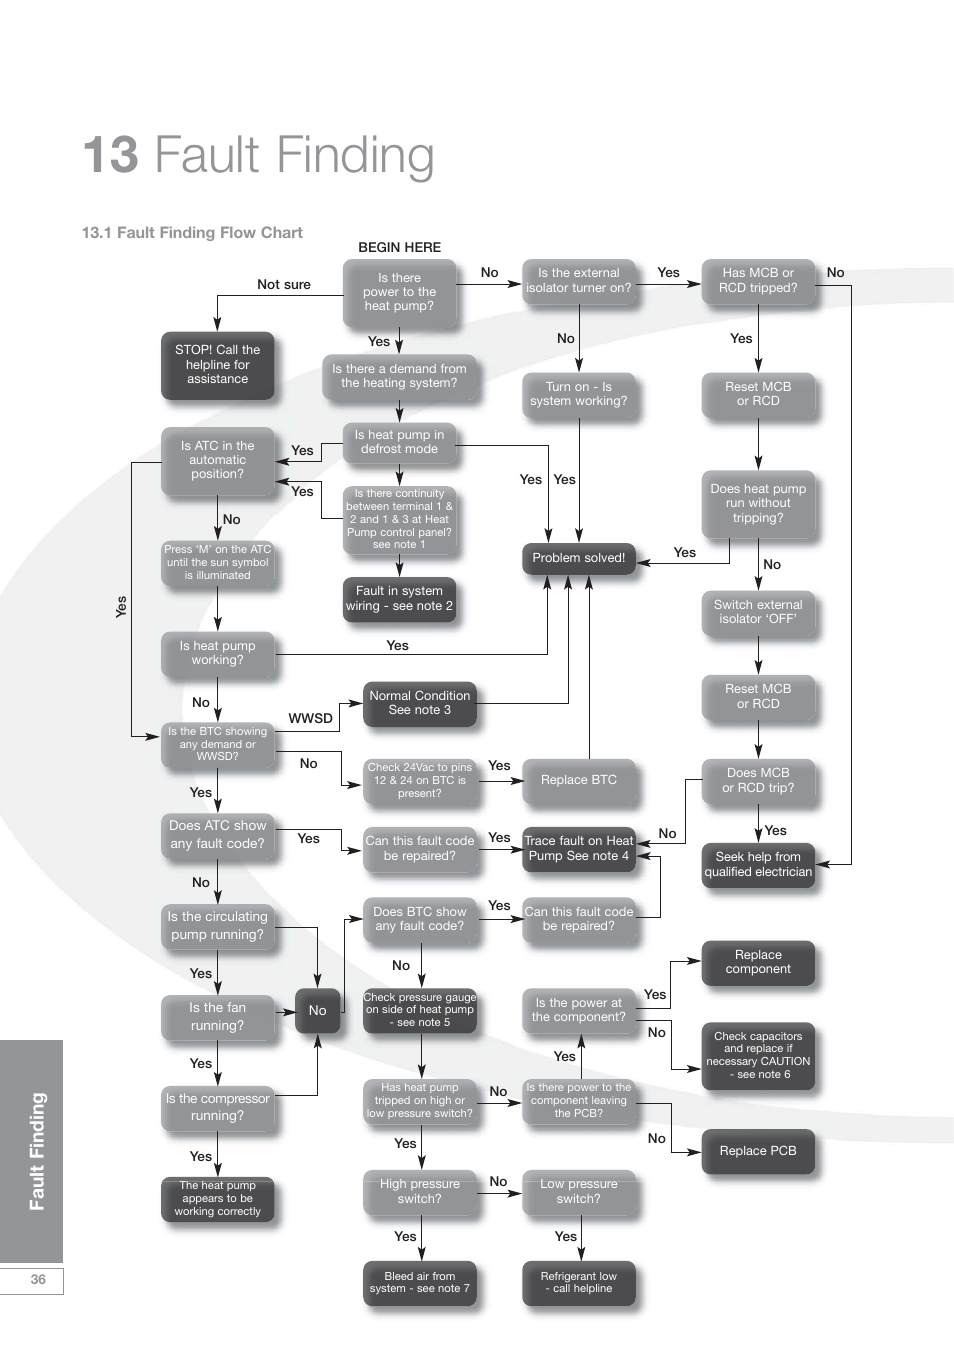 13 fault finding, Fault finding, 1 fault finding flow chart | Grant Products HPAW155 User Manual | Page 40 / 50